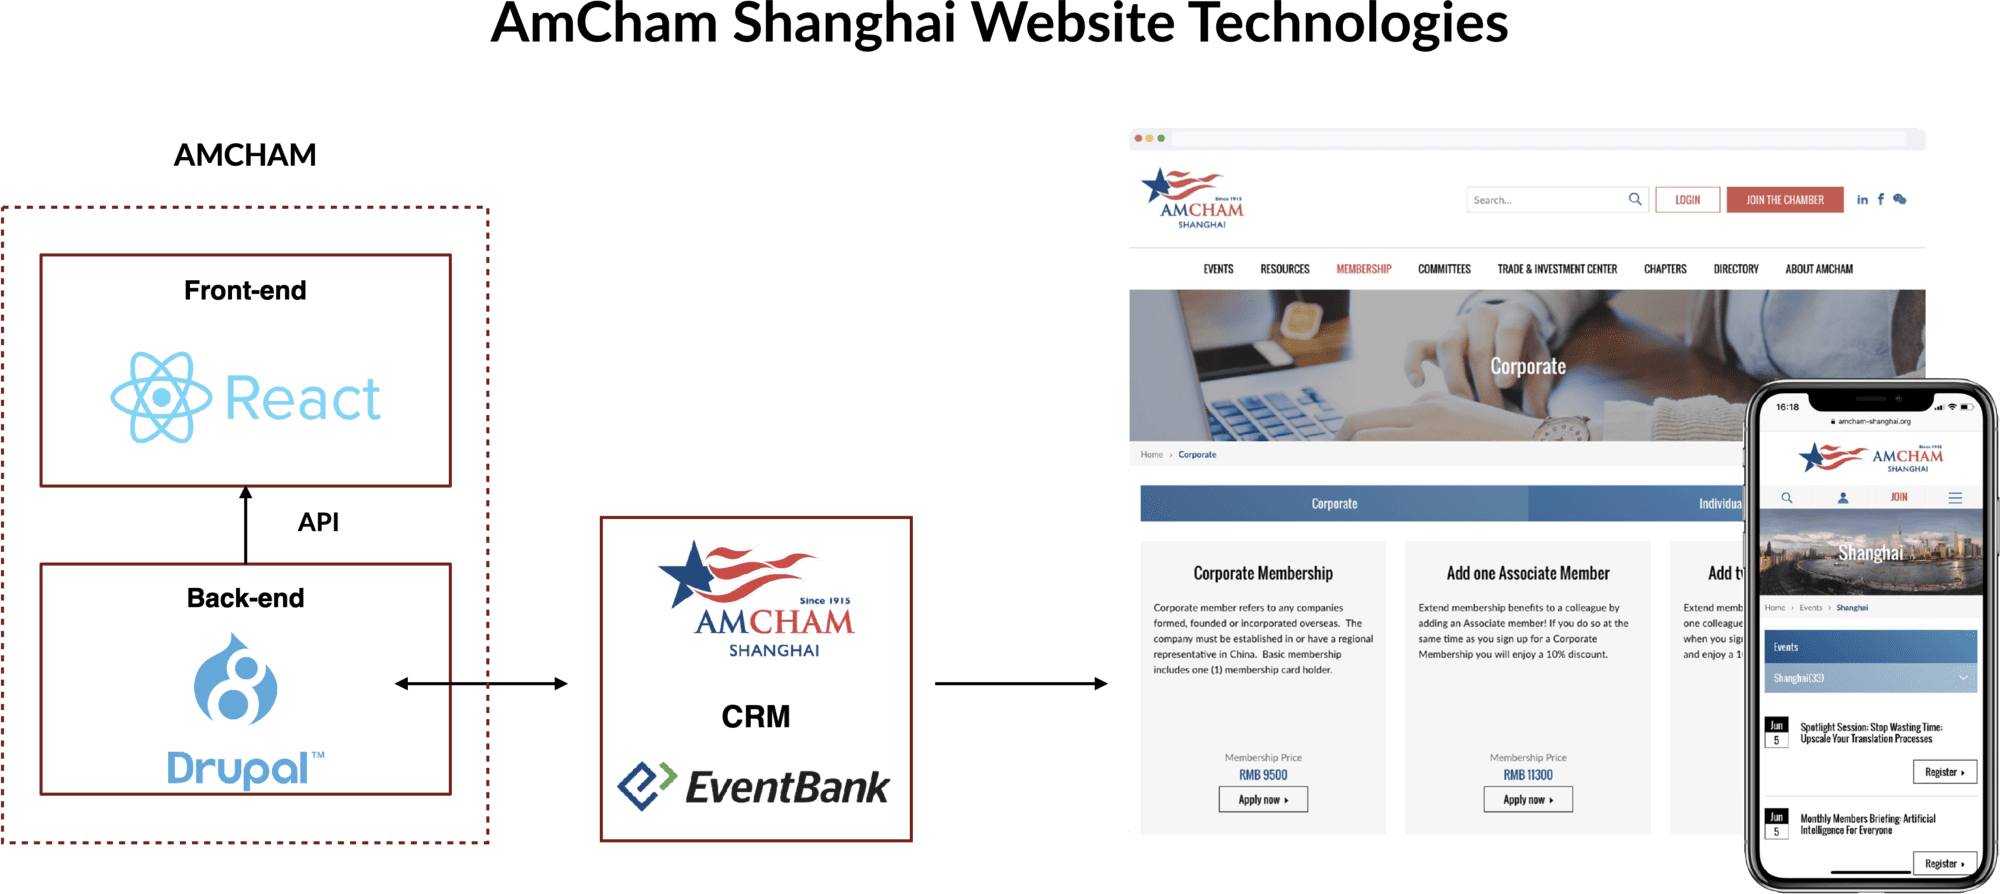 A chart illustrating the technologies behind the AmCham Shanghai website